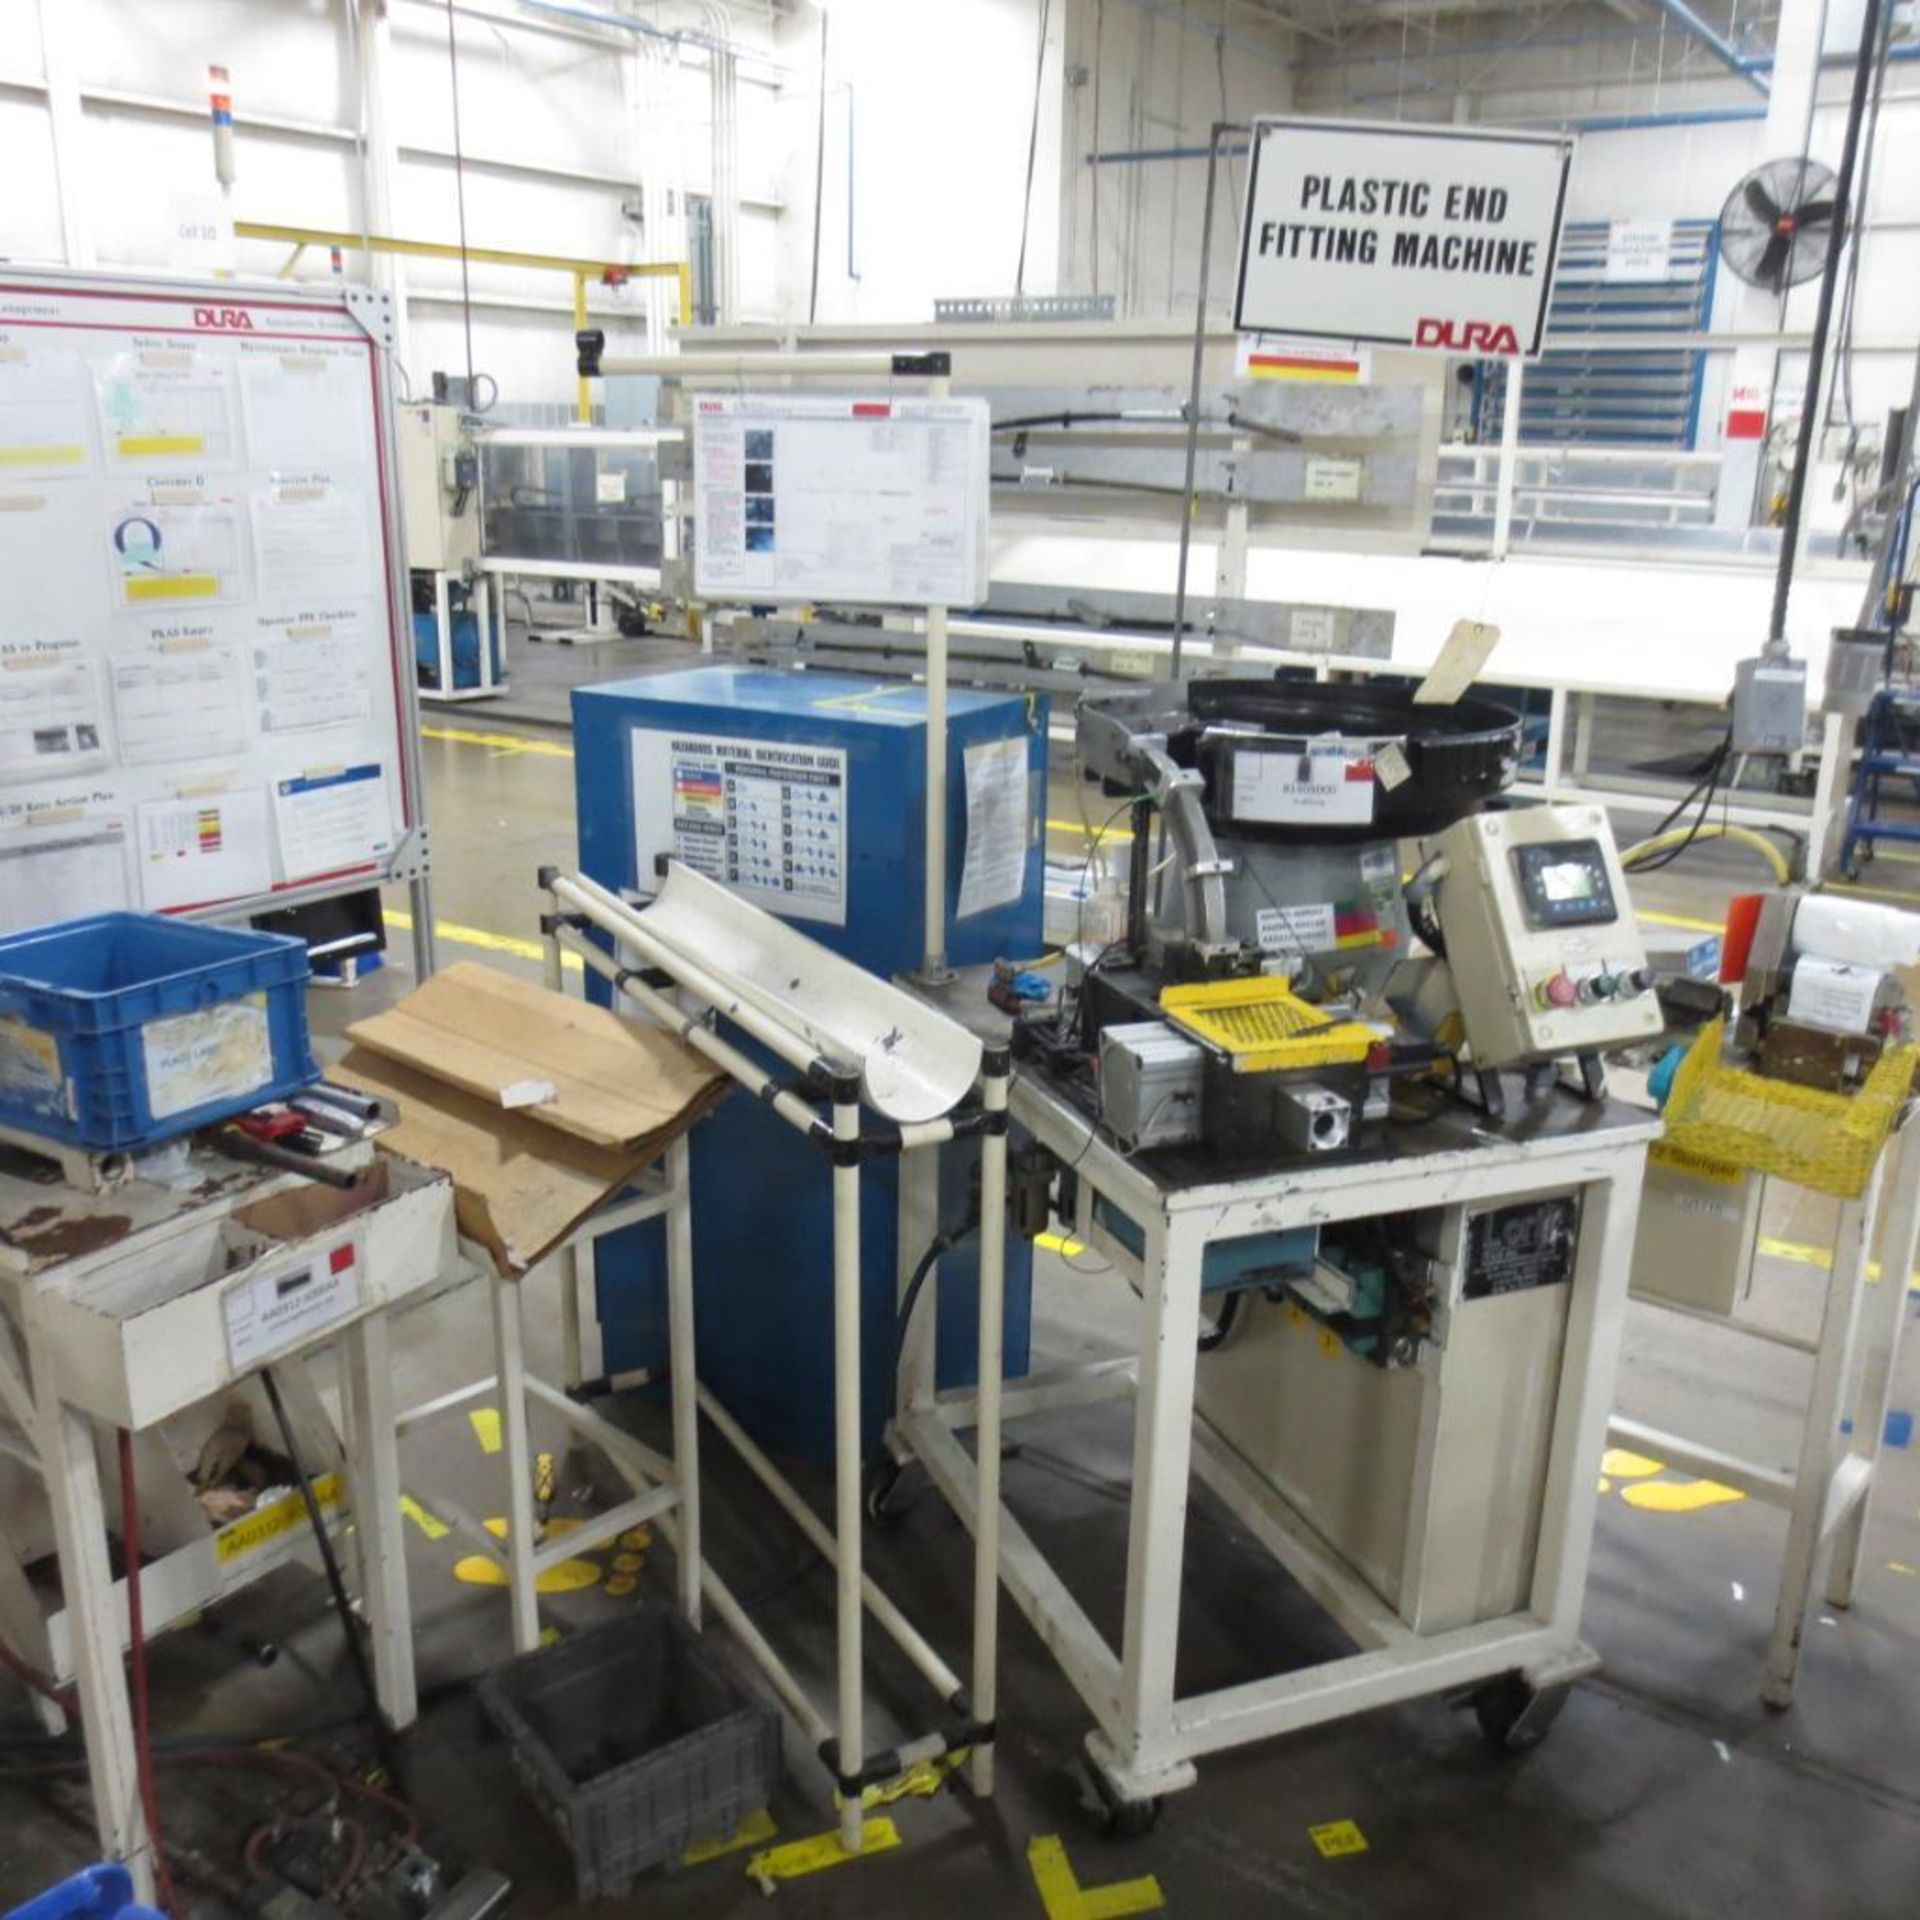 Proof Load Tester, Button Extruder, Multi Head Press, Press Sleeve Blower, Plastic End Fitting Machi - Image 8 of 12